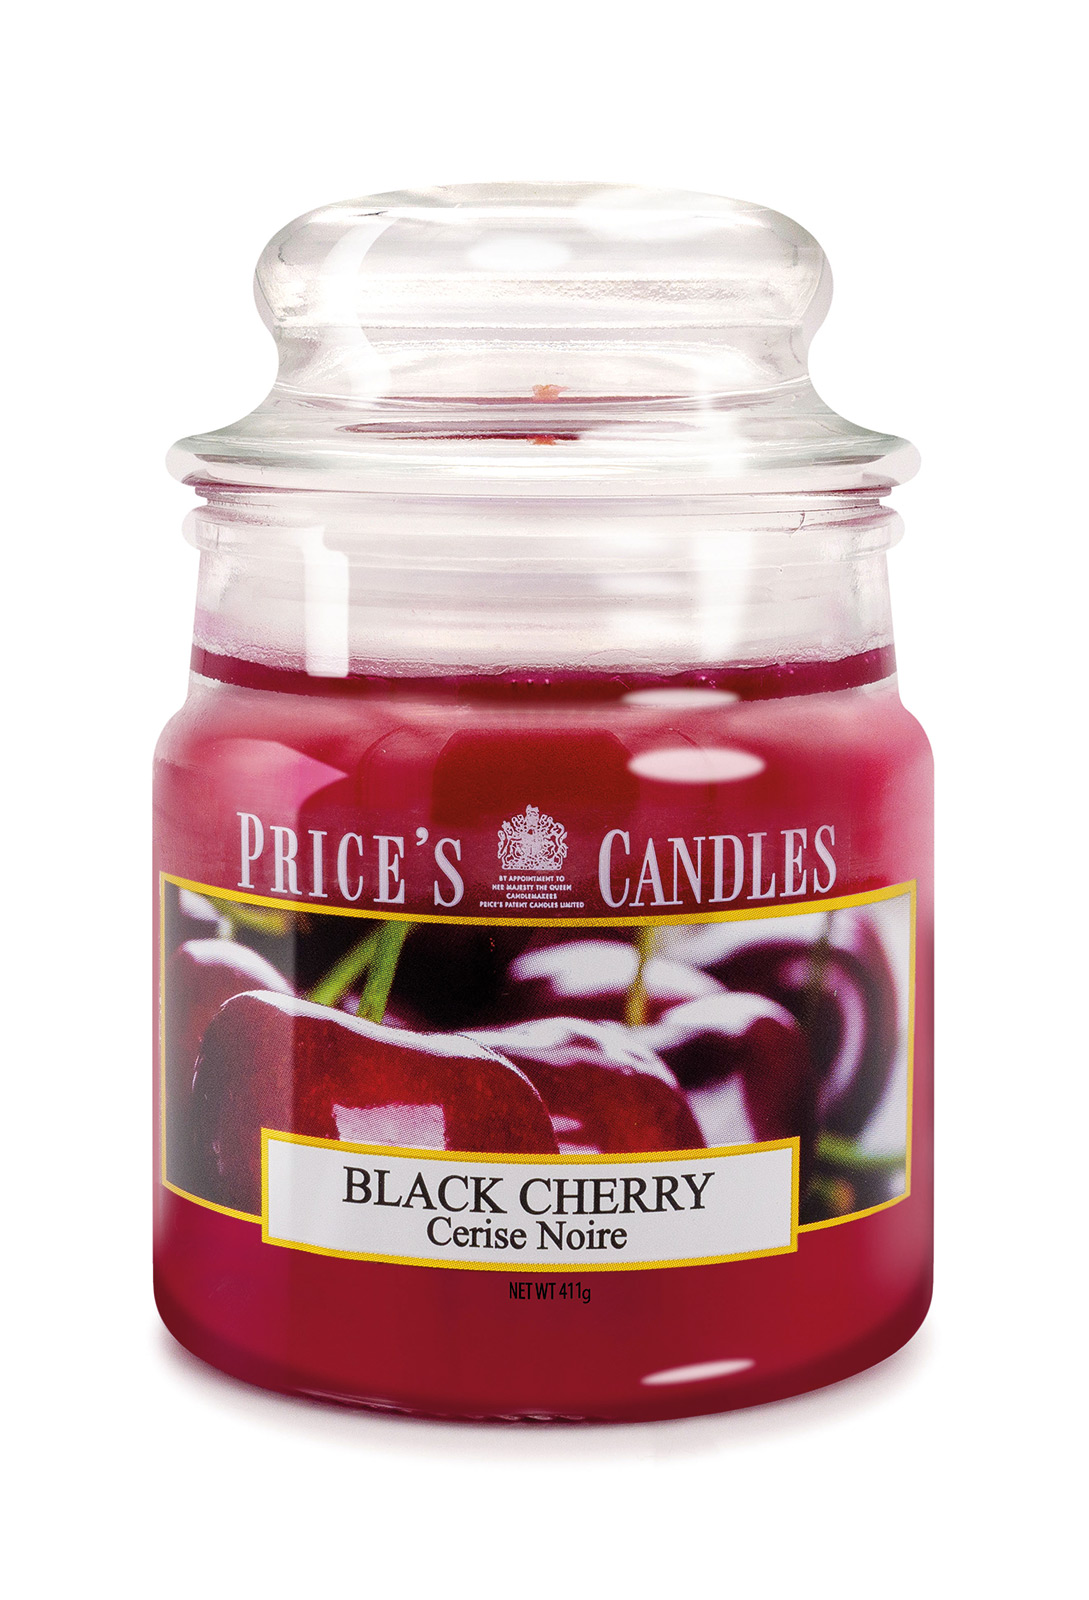 Prices Candle "Black Cherry" 100g 